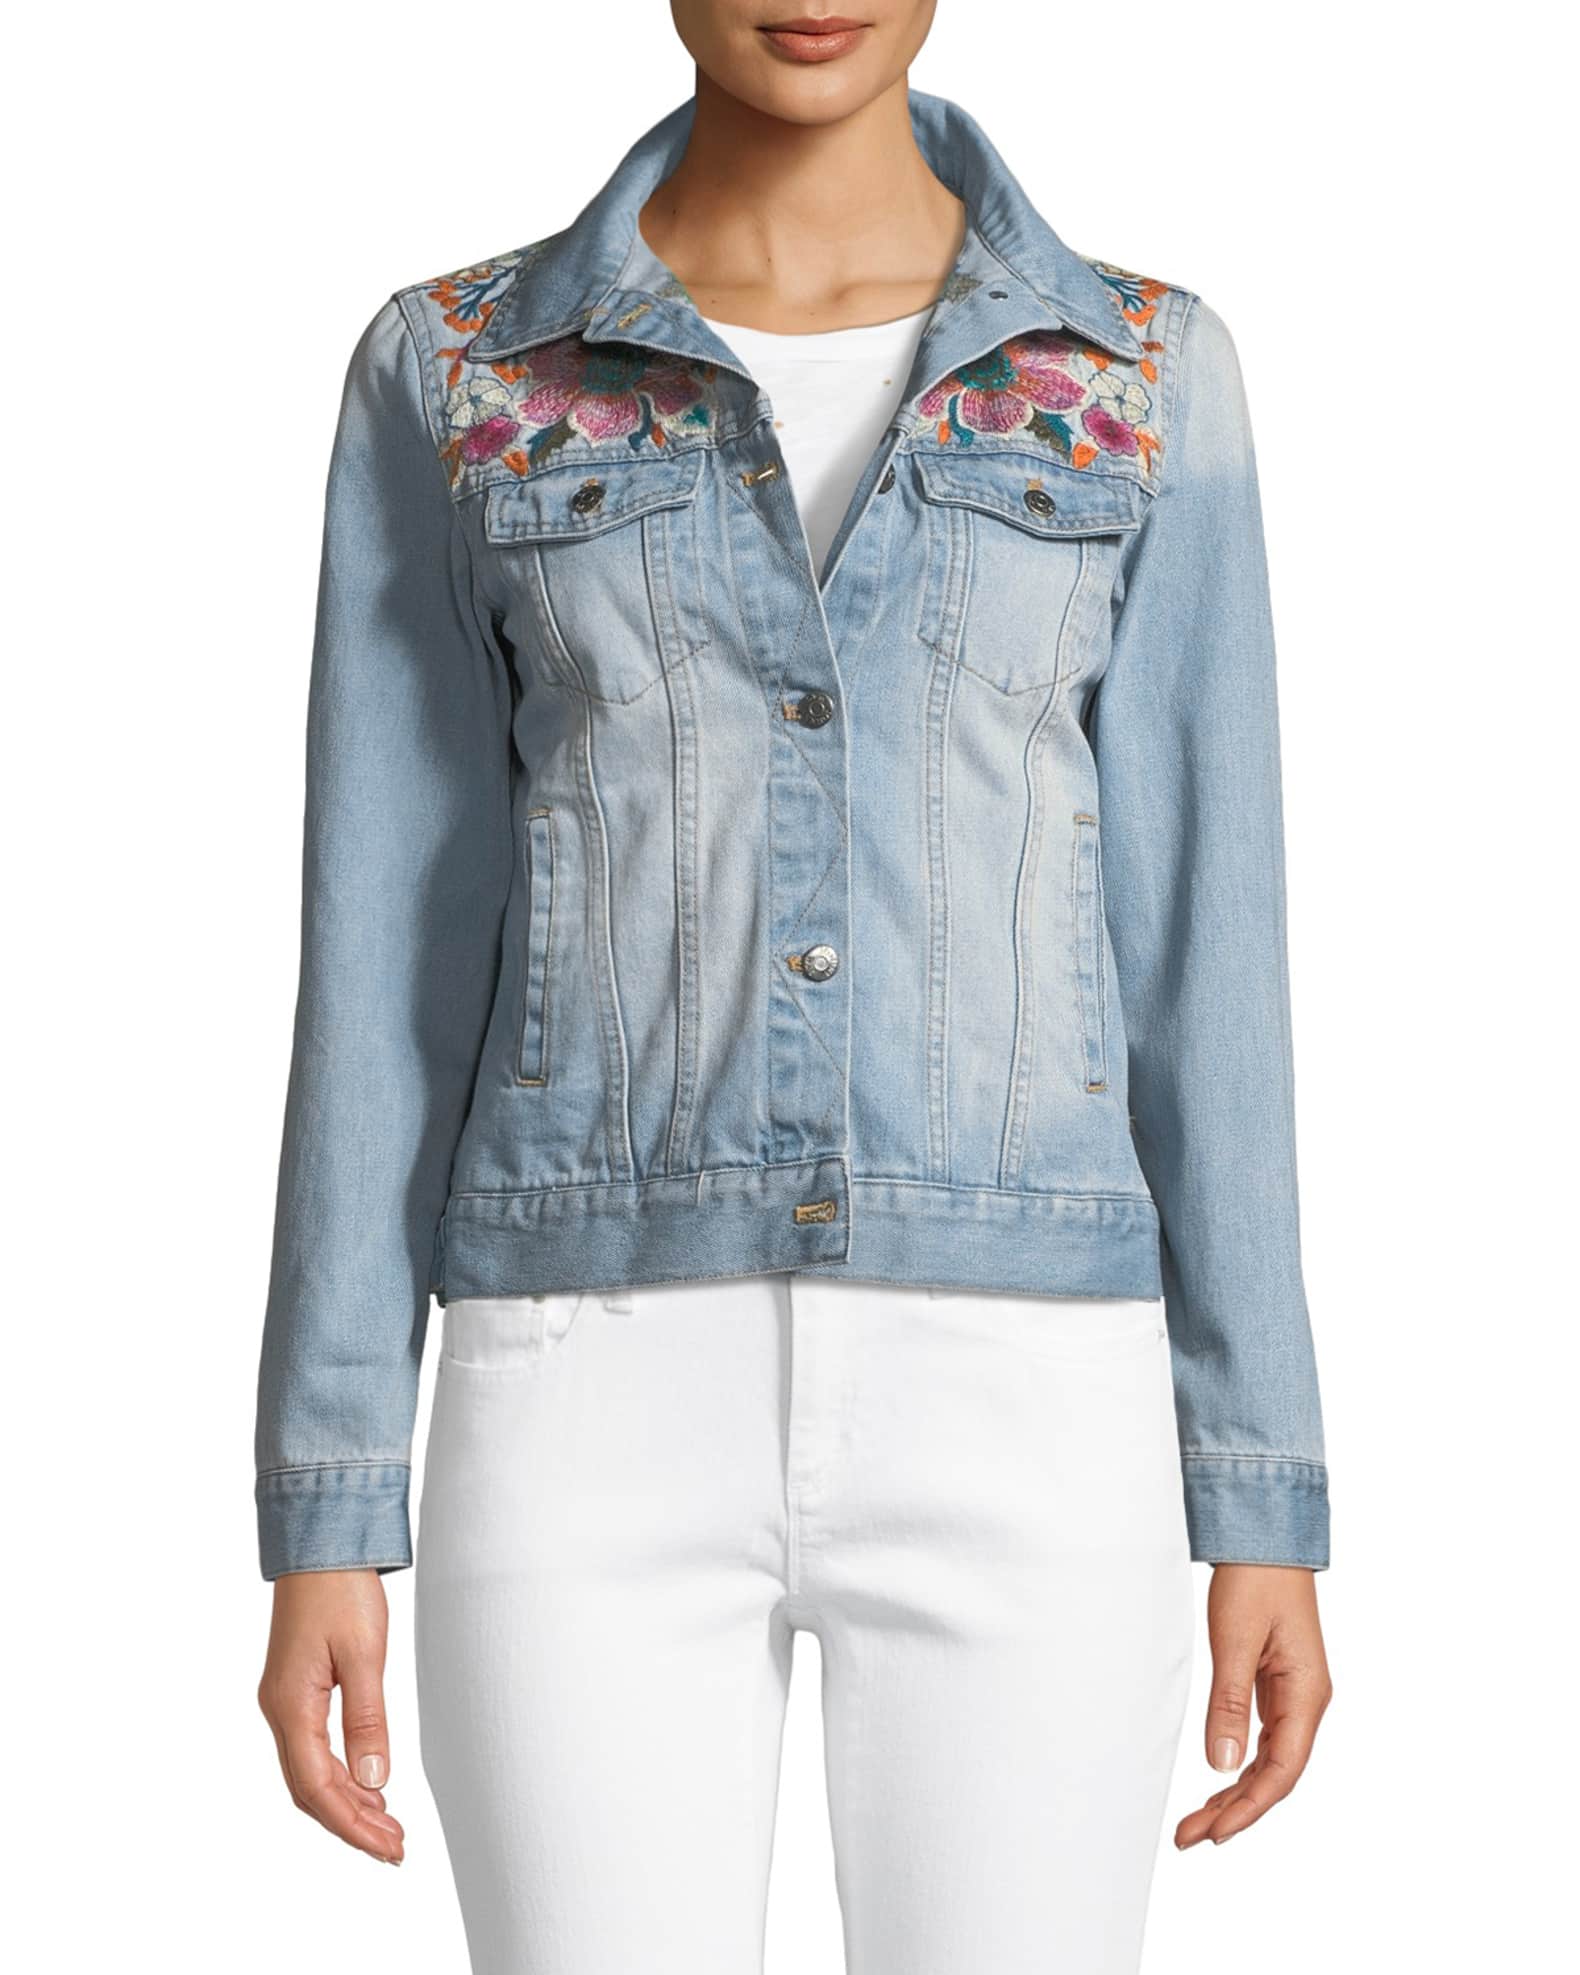 Nena Embroidered Denim Jacket and Matching Items | Neiman Marcus